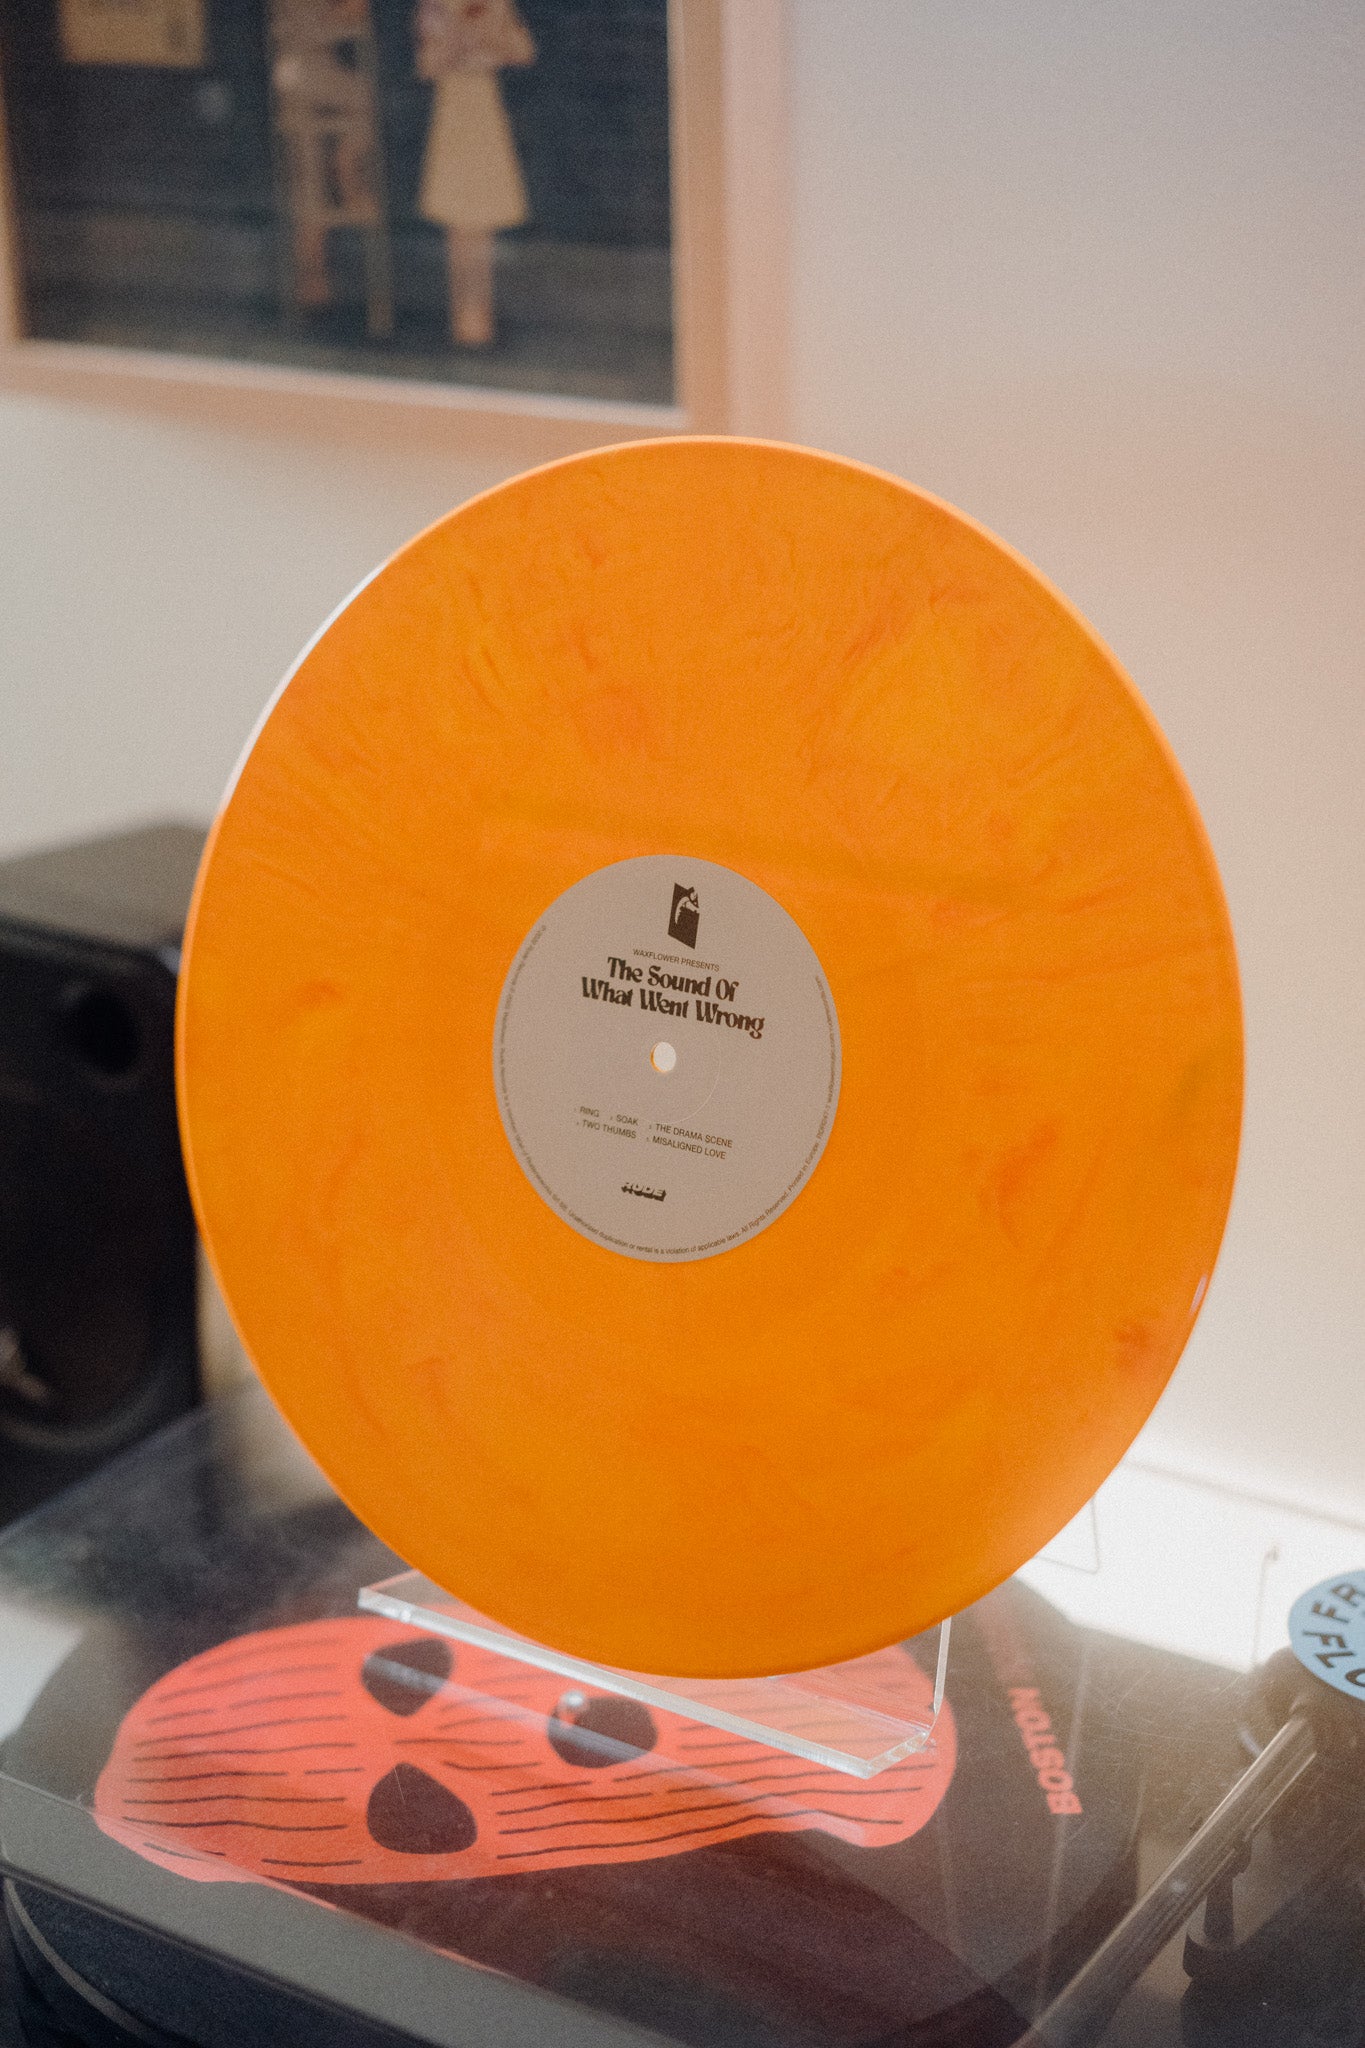 'The Sound of What Went Wrong' Orange Marble 12' Vinyl